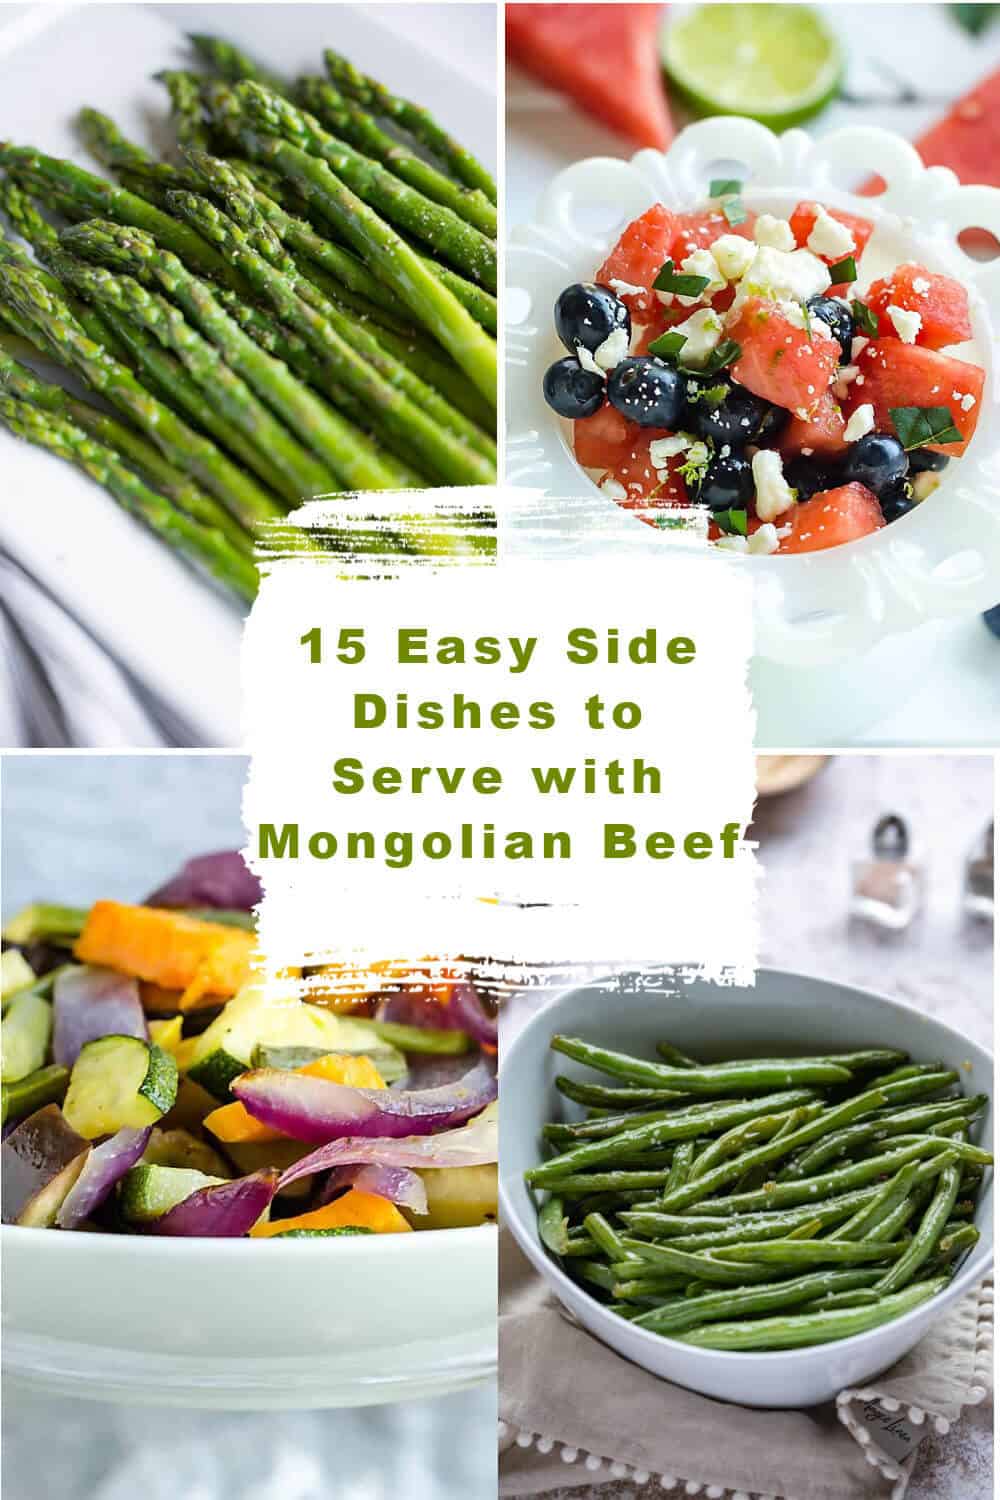 4 image collage of side dishes to serve with Mongolian Beef